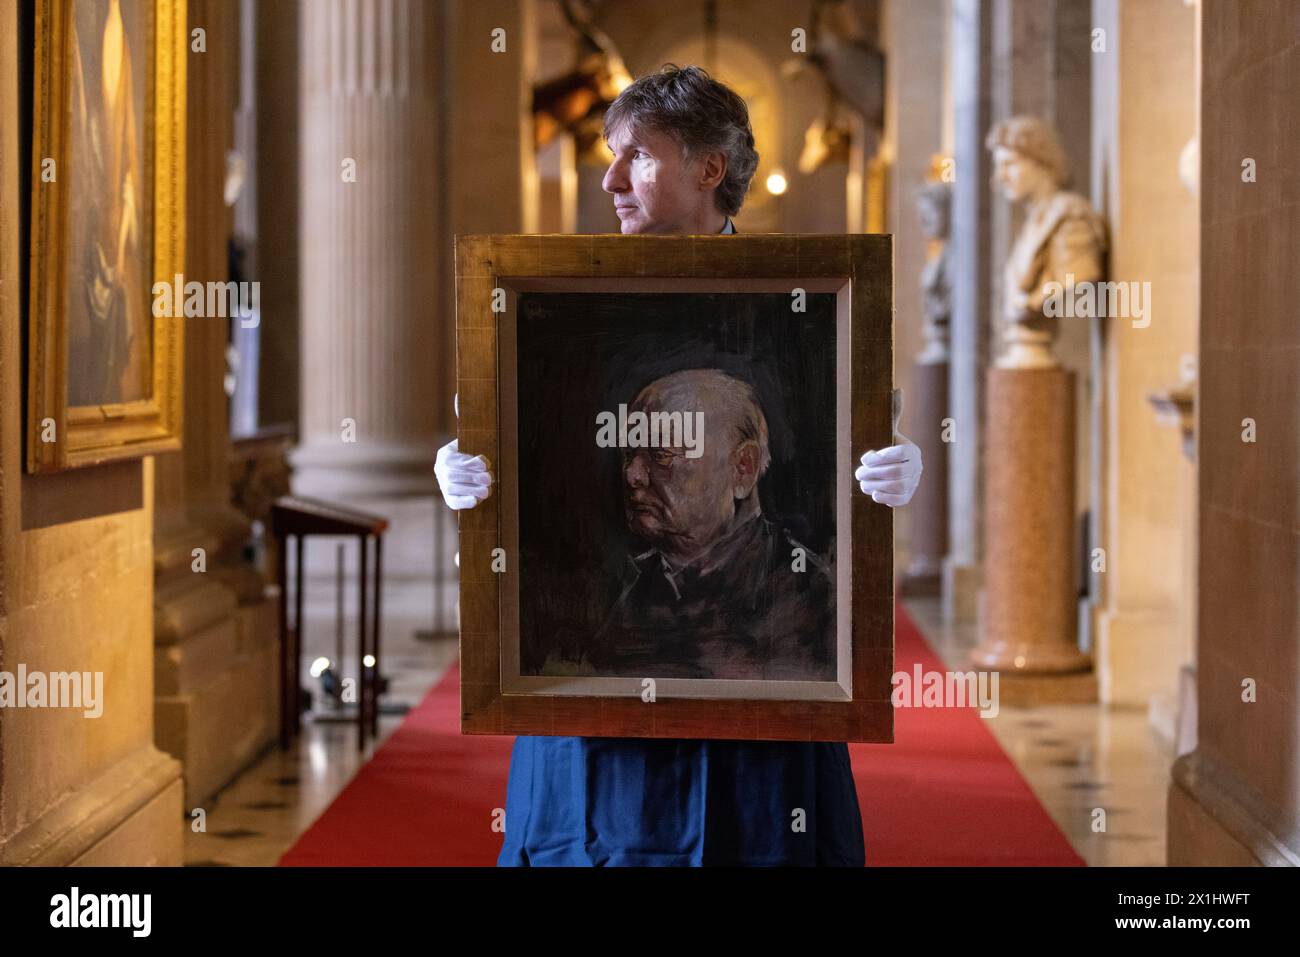 Sotheby's staff holds a portrait of the former British prime minister Winston Churchill, painted by Graham Sutherland in 1954, Blenheim Palace, UK Stock Photo